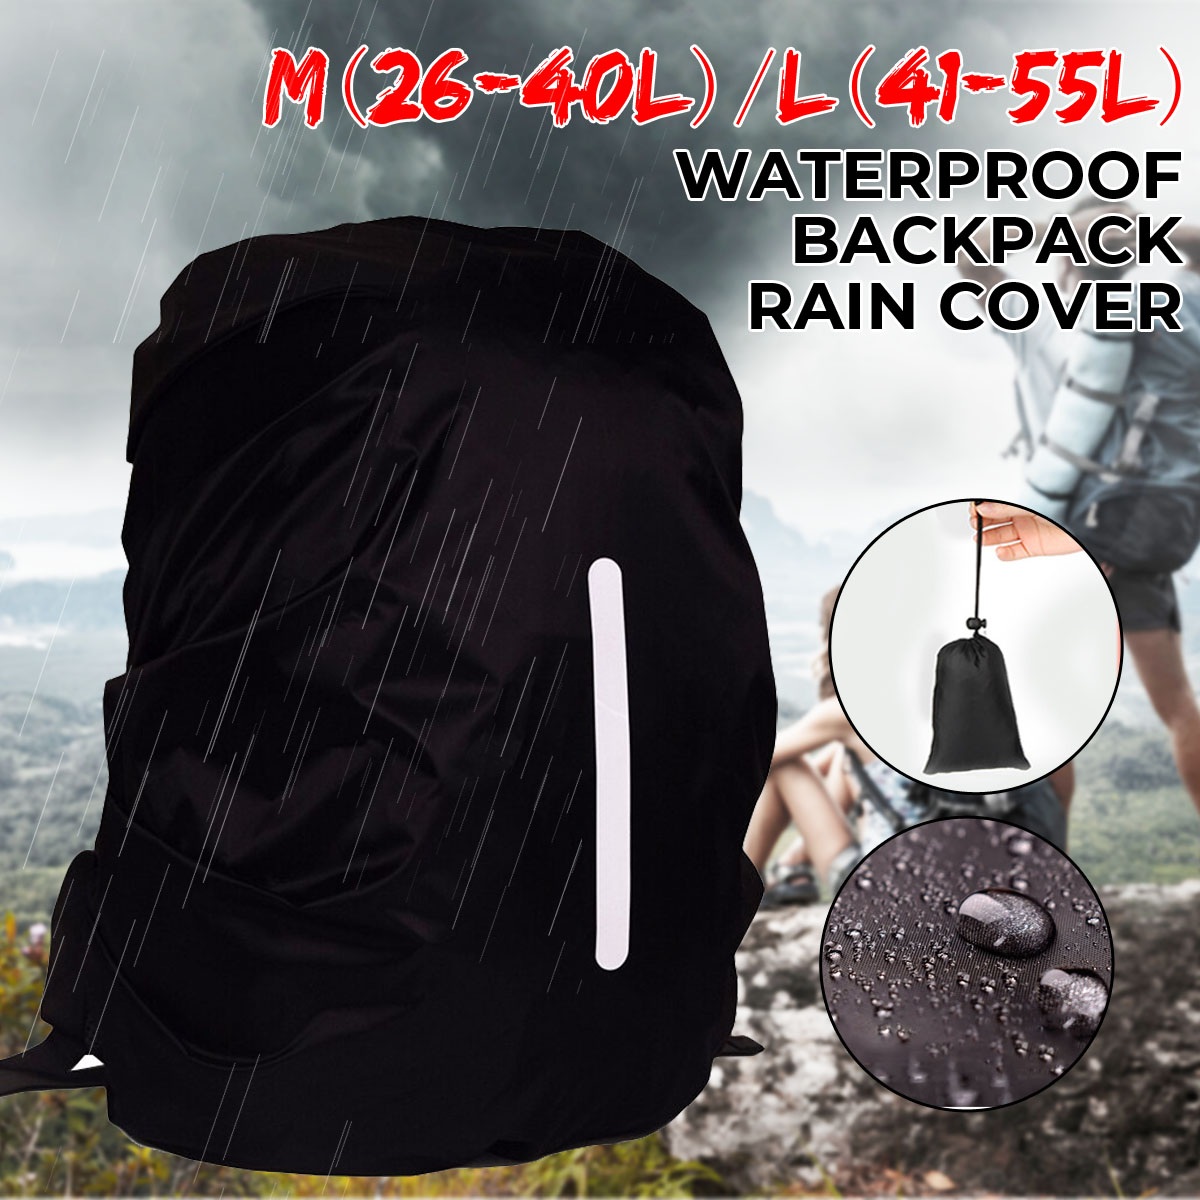 Portable-Outdoor-Backpack-Waterproof-Dust-Cover-Travel-Backpack-Rain-Cover-Hiking-Camping-Sports-Acc-1790124-1